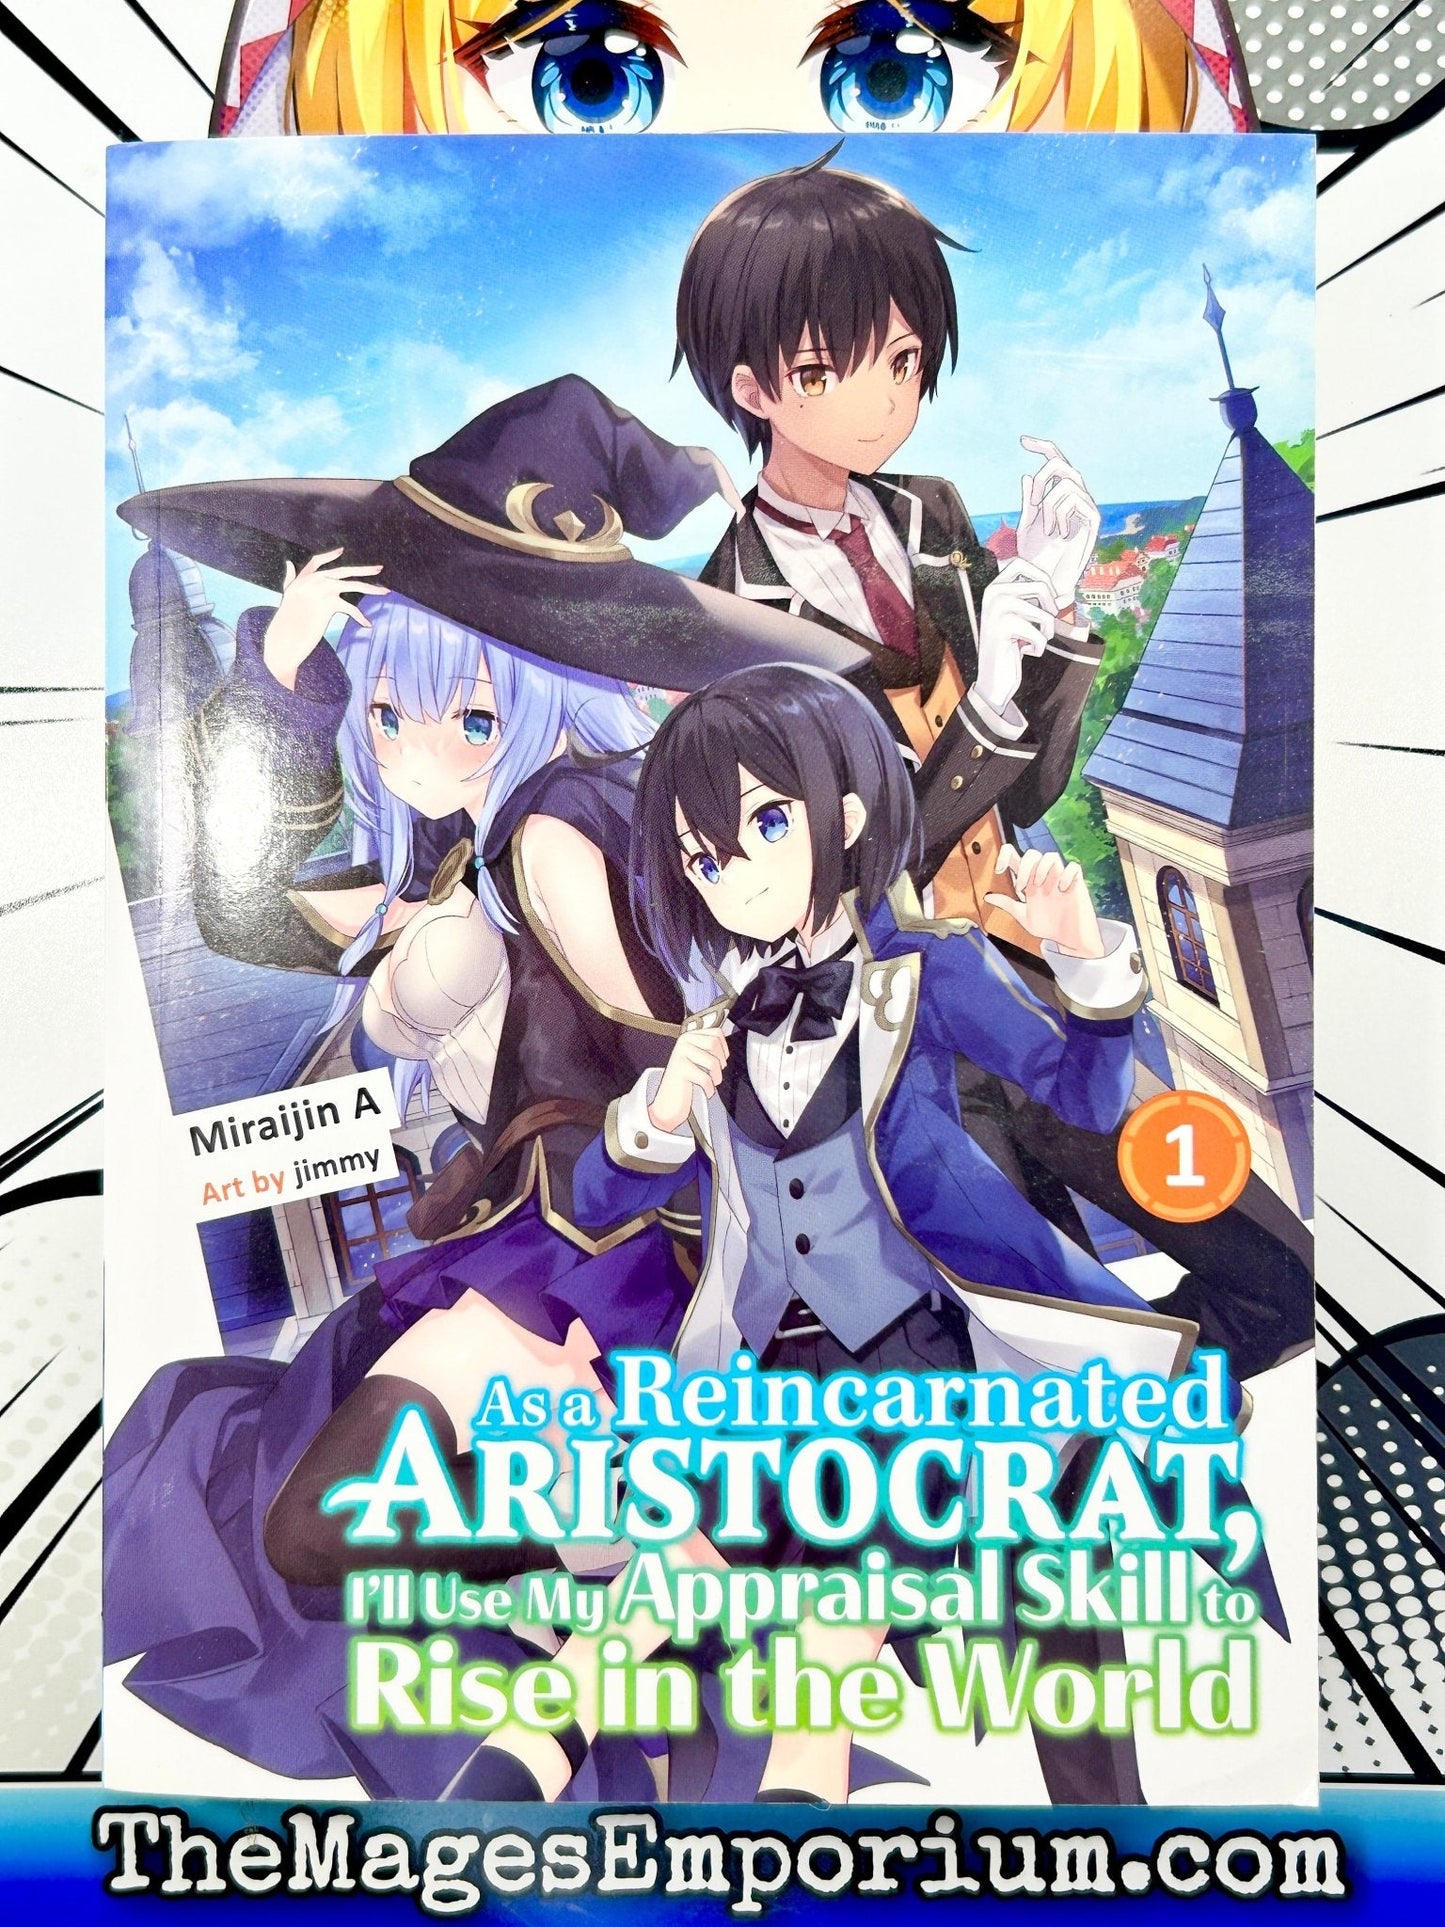 As a Reincarnated Aristocrat, I'll Use My Appraisal Skill to Rise in the World Vol 1 Light Novel